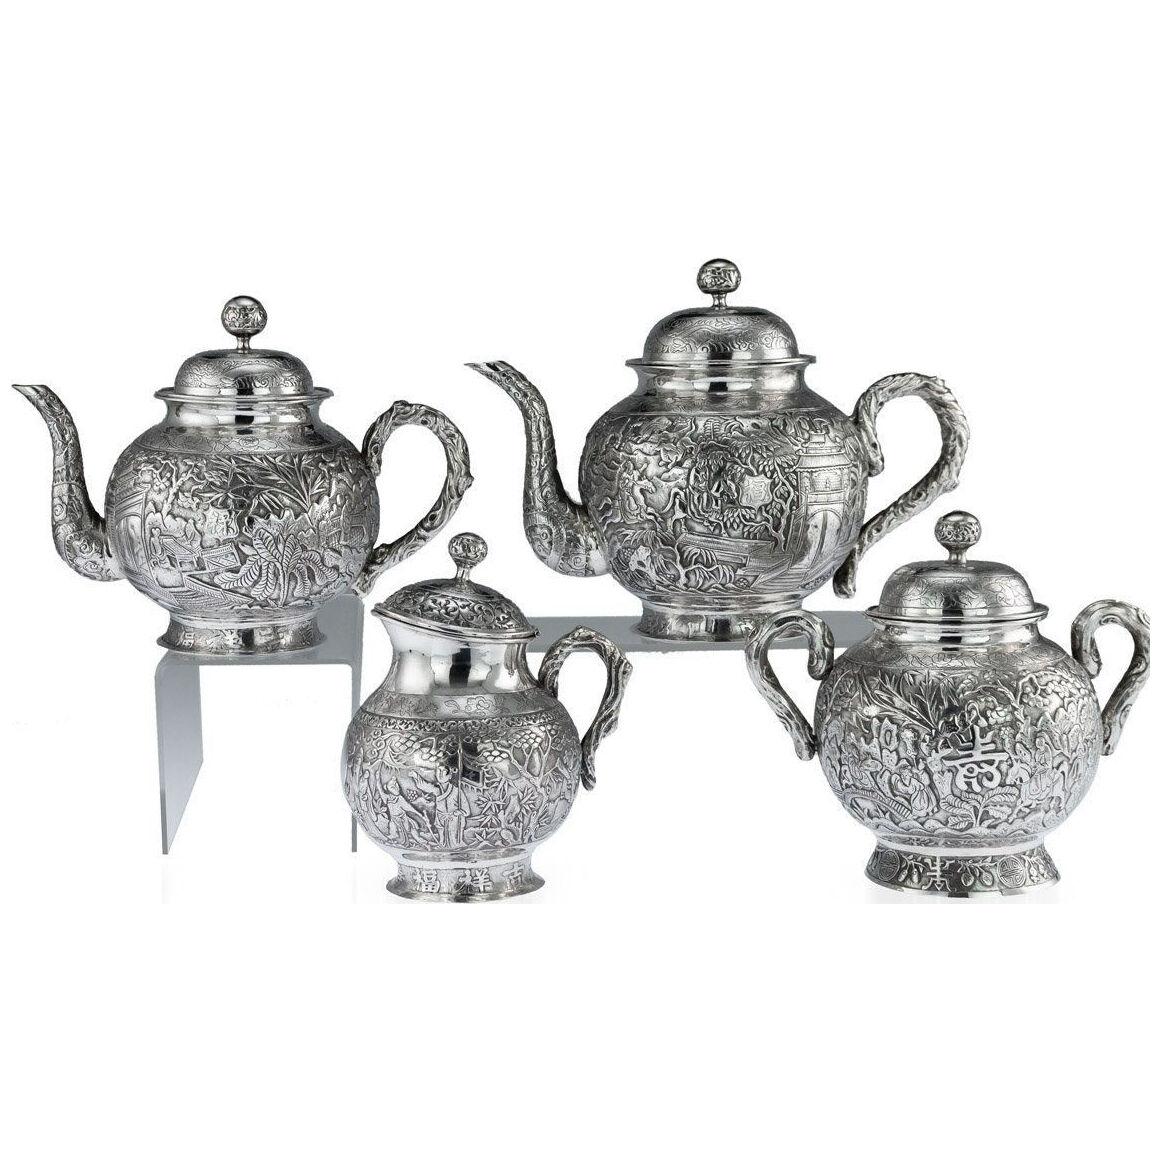 19thC Chinese Exceptional Solid Silver Tea Service, Hong Kong c.1890